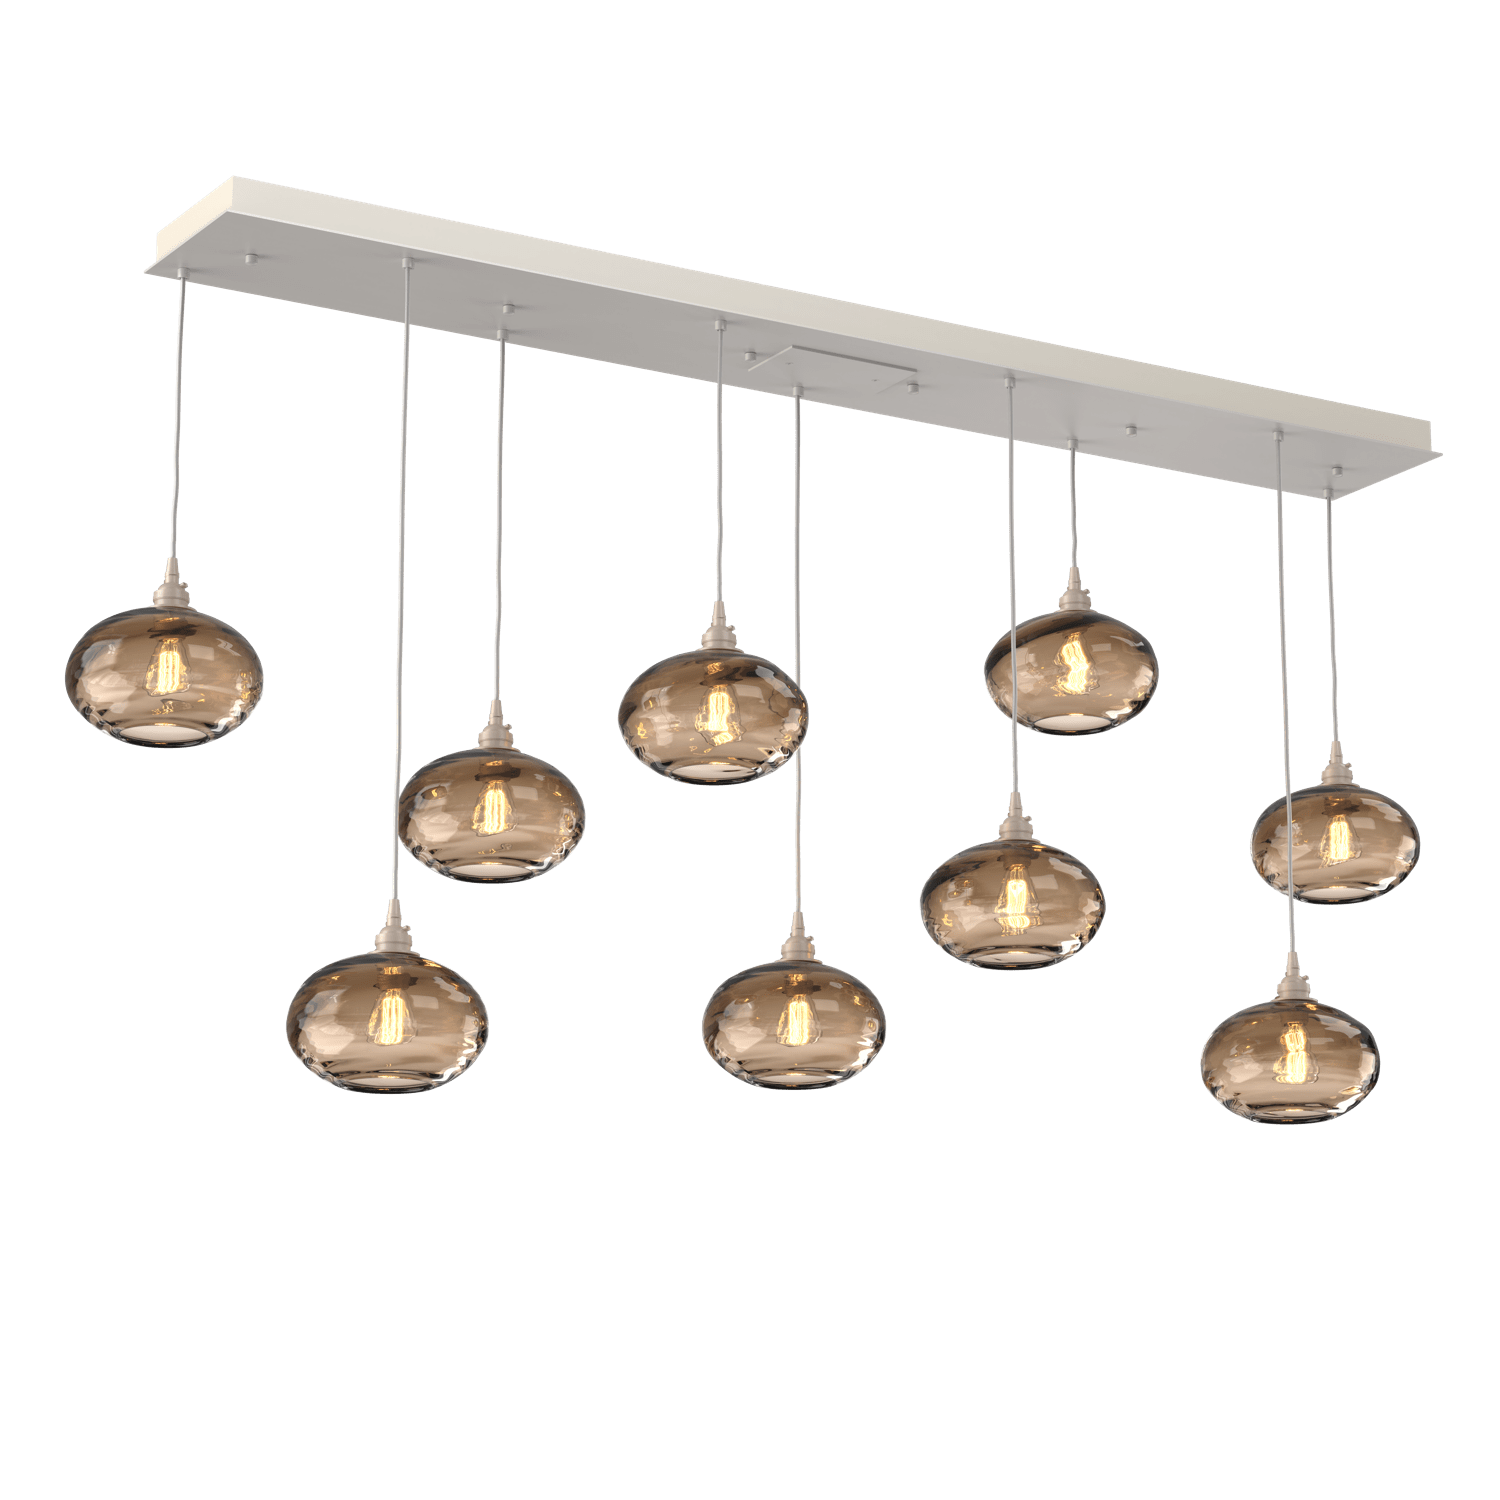 PLB0036-09-BS-OB-Hammerton-Studio-Optic-Blown-Glass-Coppa-9-light-linear-pendant-chandelier-with-metallic-beige-silver-finish-and-optic-bronze-blown-glass-shades-and-incandescent-lamping